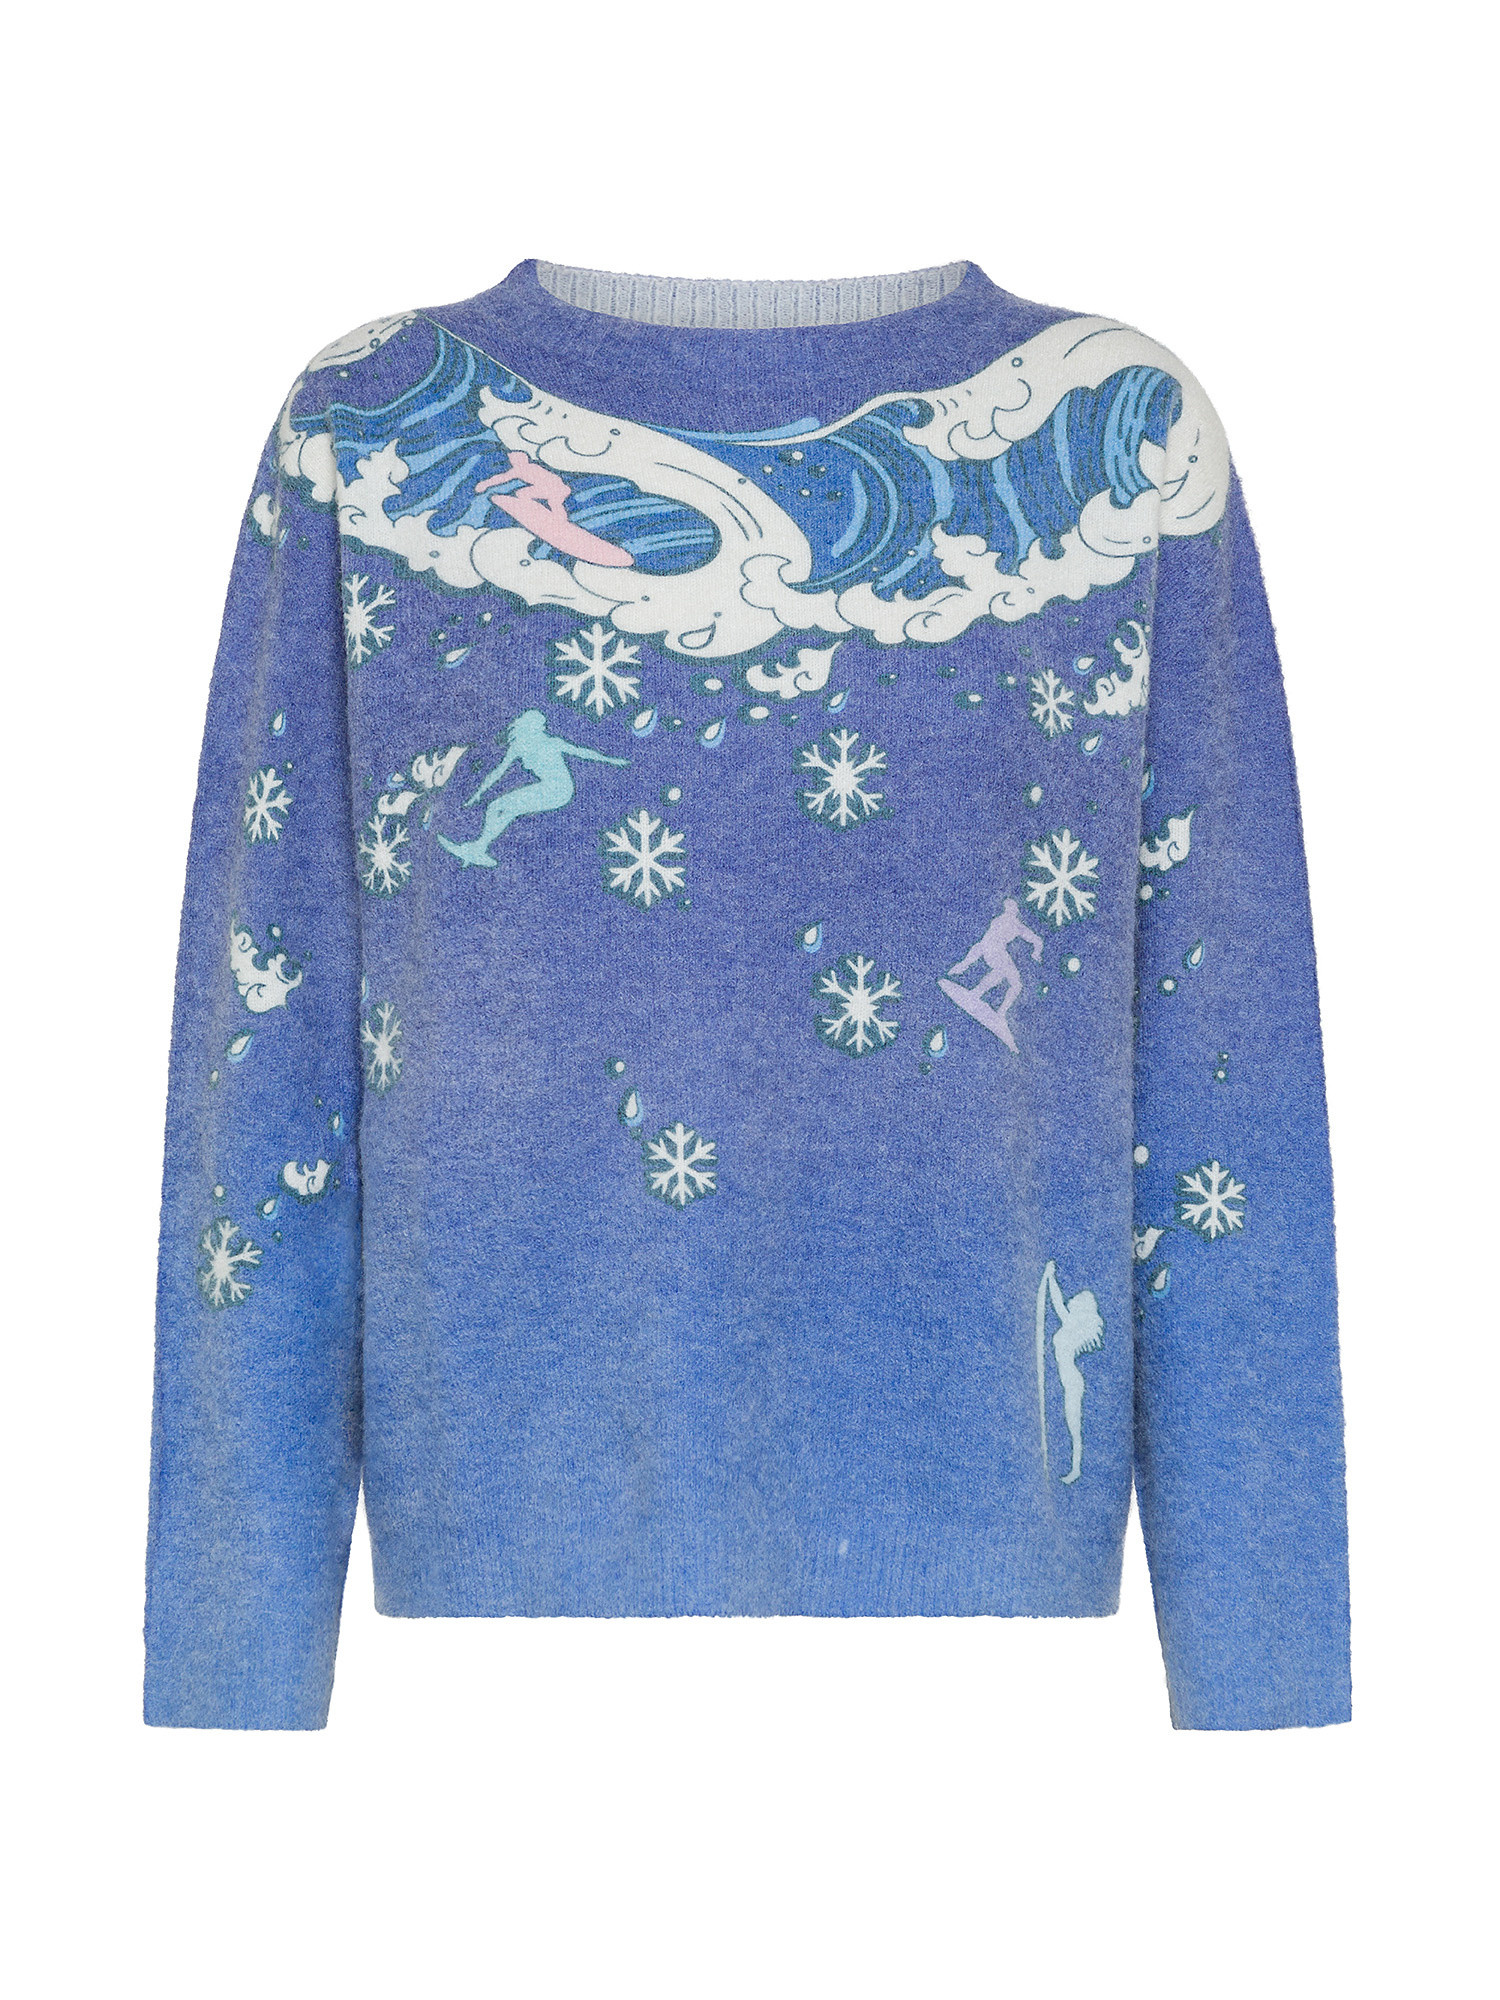 The Surfer's Christmas sweater by Paula Cademartori, Blue, large image number 0